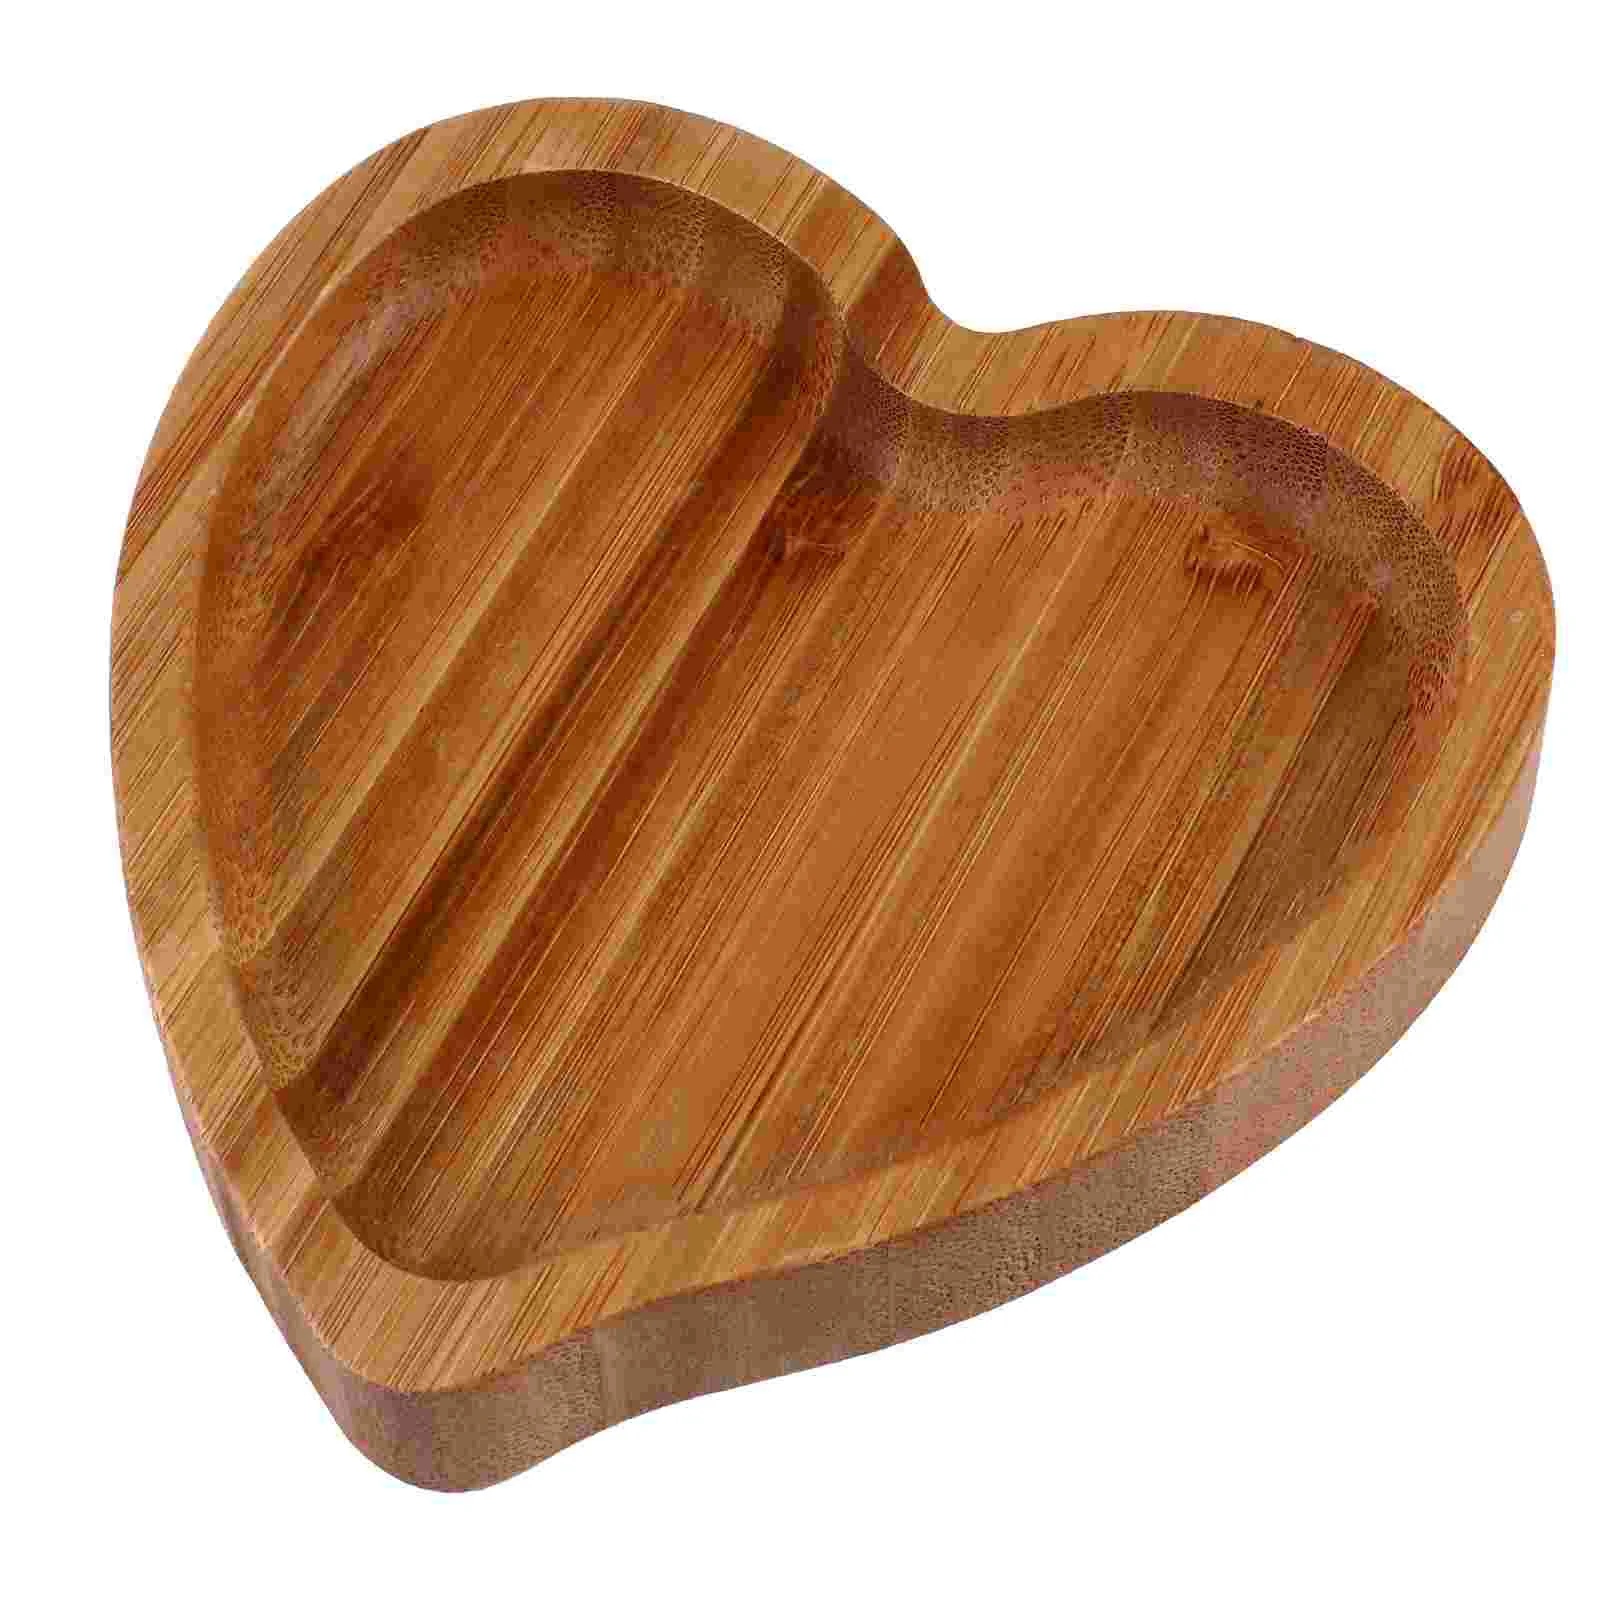 

Tray Heart Jewelry Wooden Plate Dish Serving Wood Shaped Snack Platter Fruit Ring Dessert Holder Storage Trinket Cheese Plates